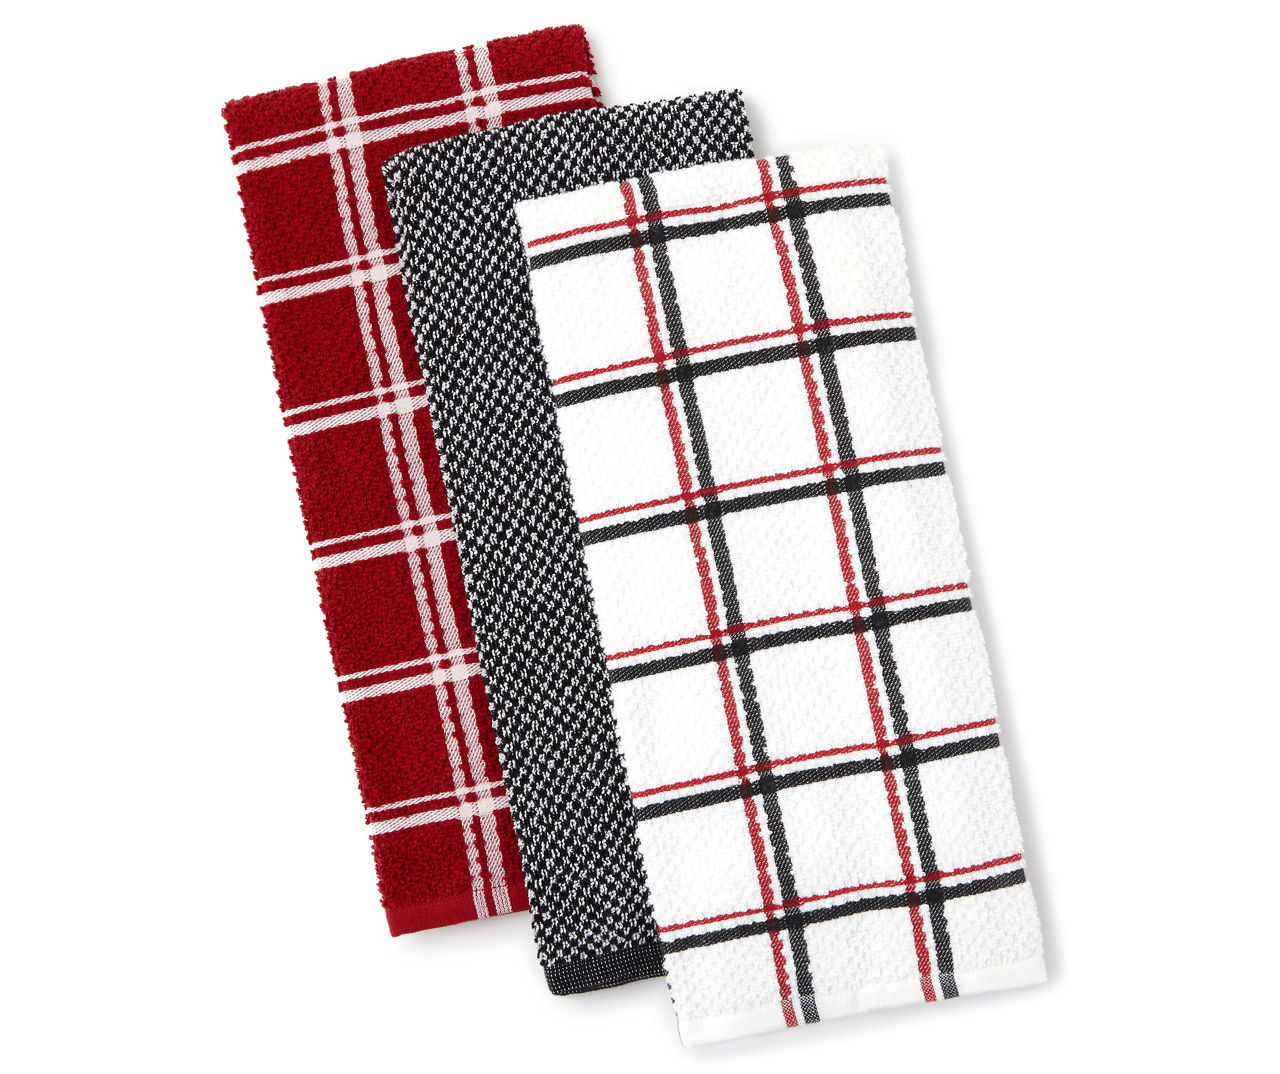 Master Cuisine Red & Plaid Kitchen Towels, 3-Pack